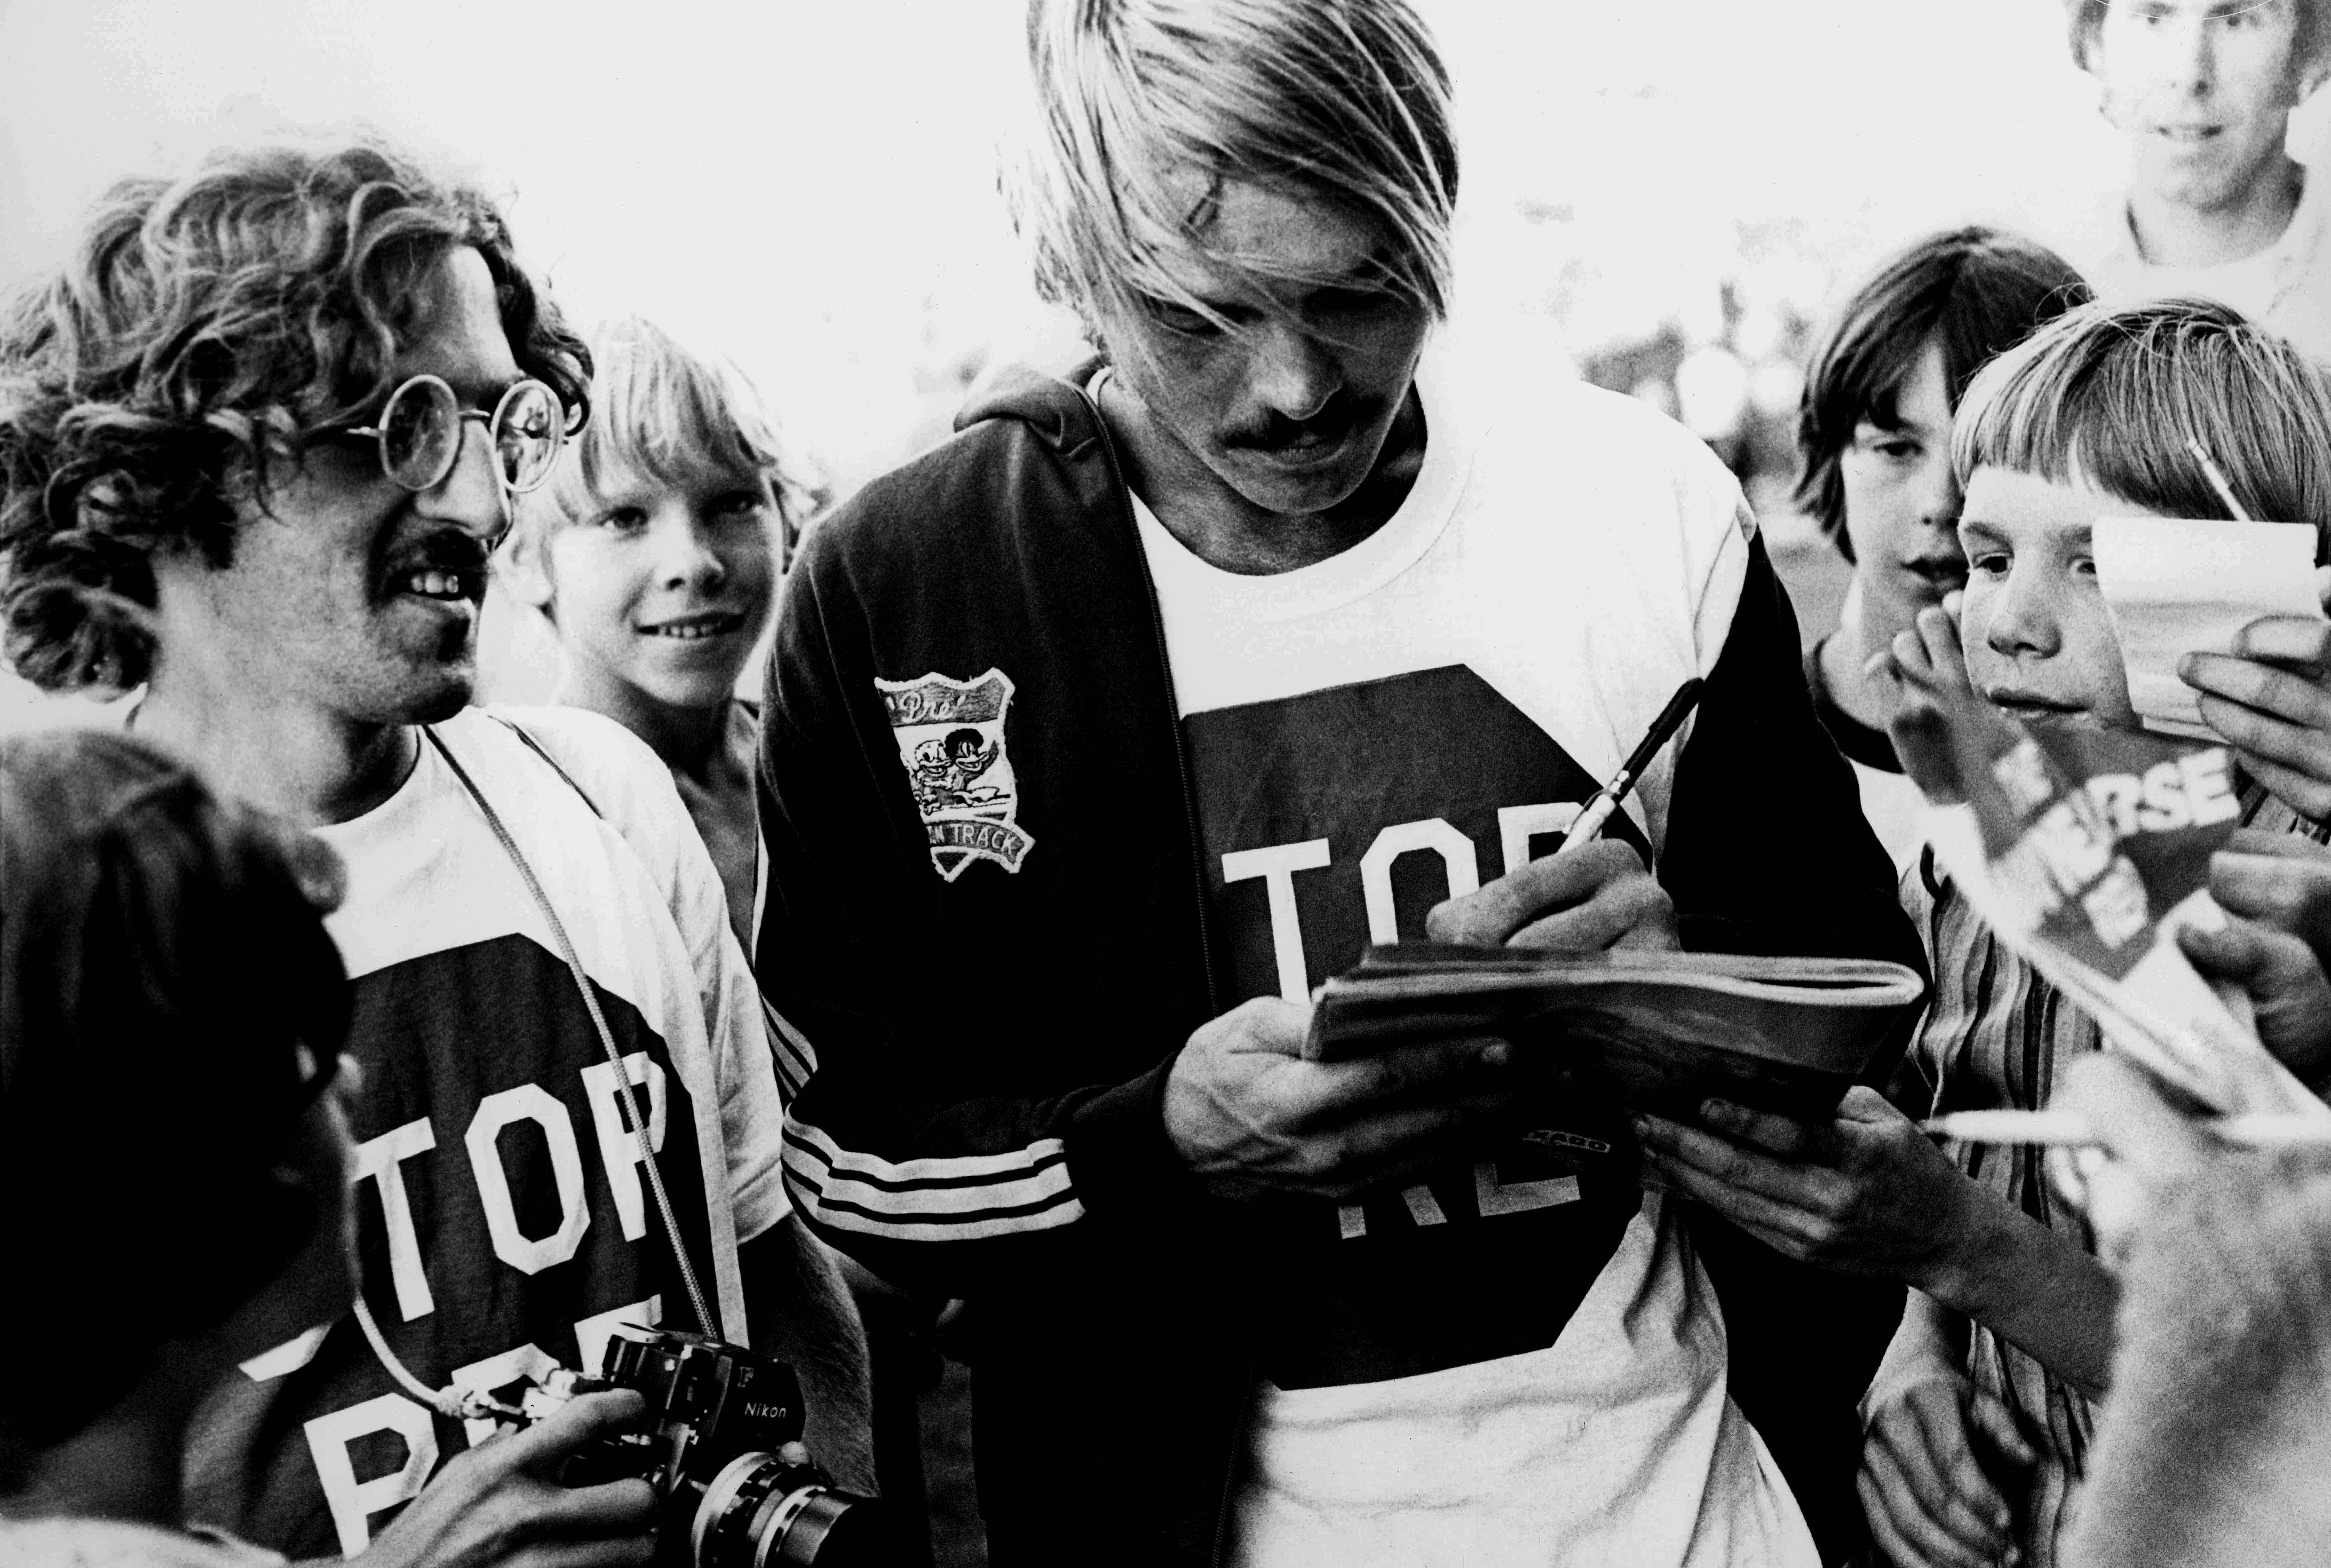 The story the Stop shirts, which have endured for in Steve Prefontaine's memory -